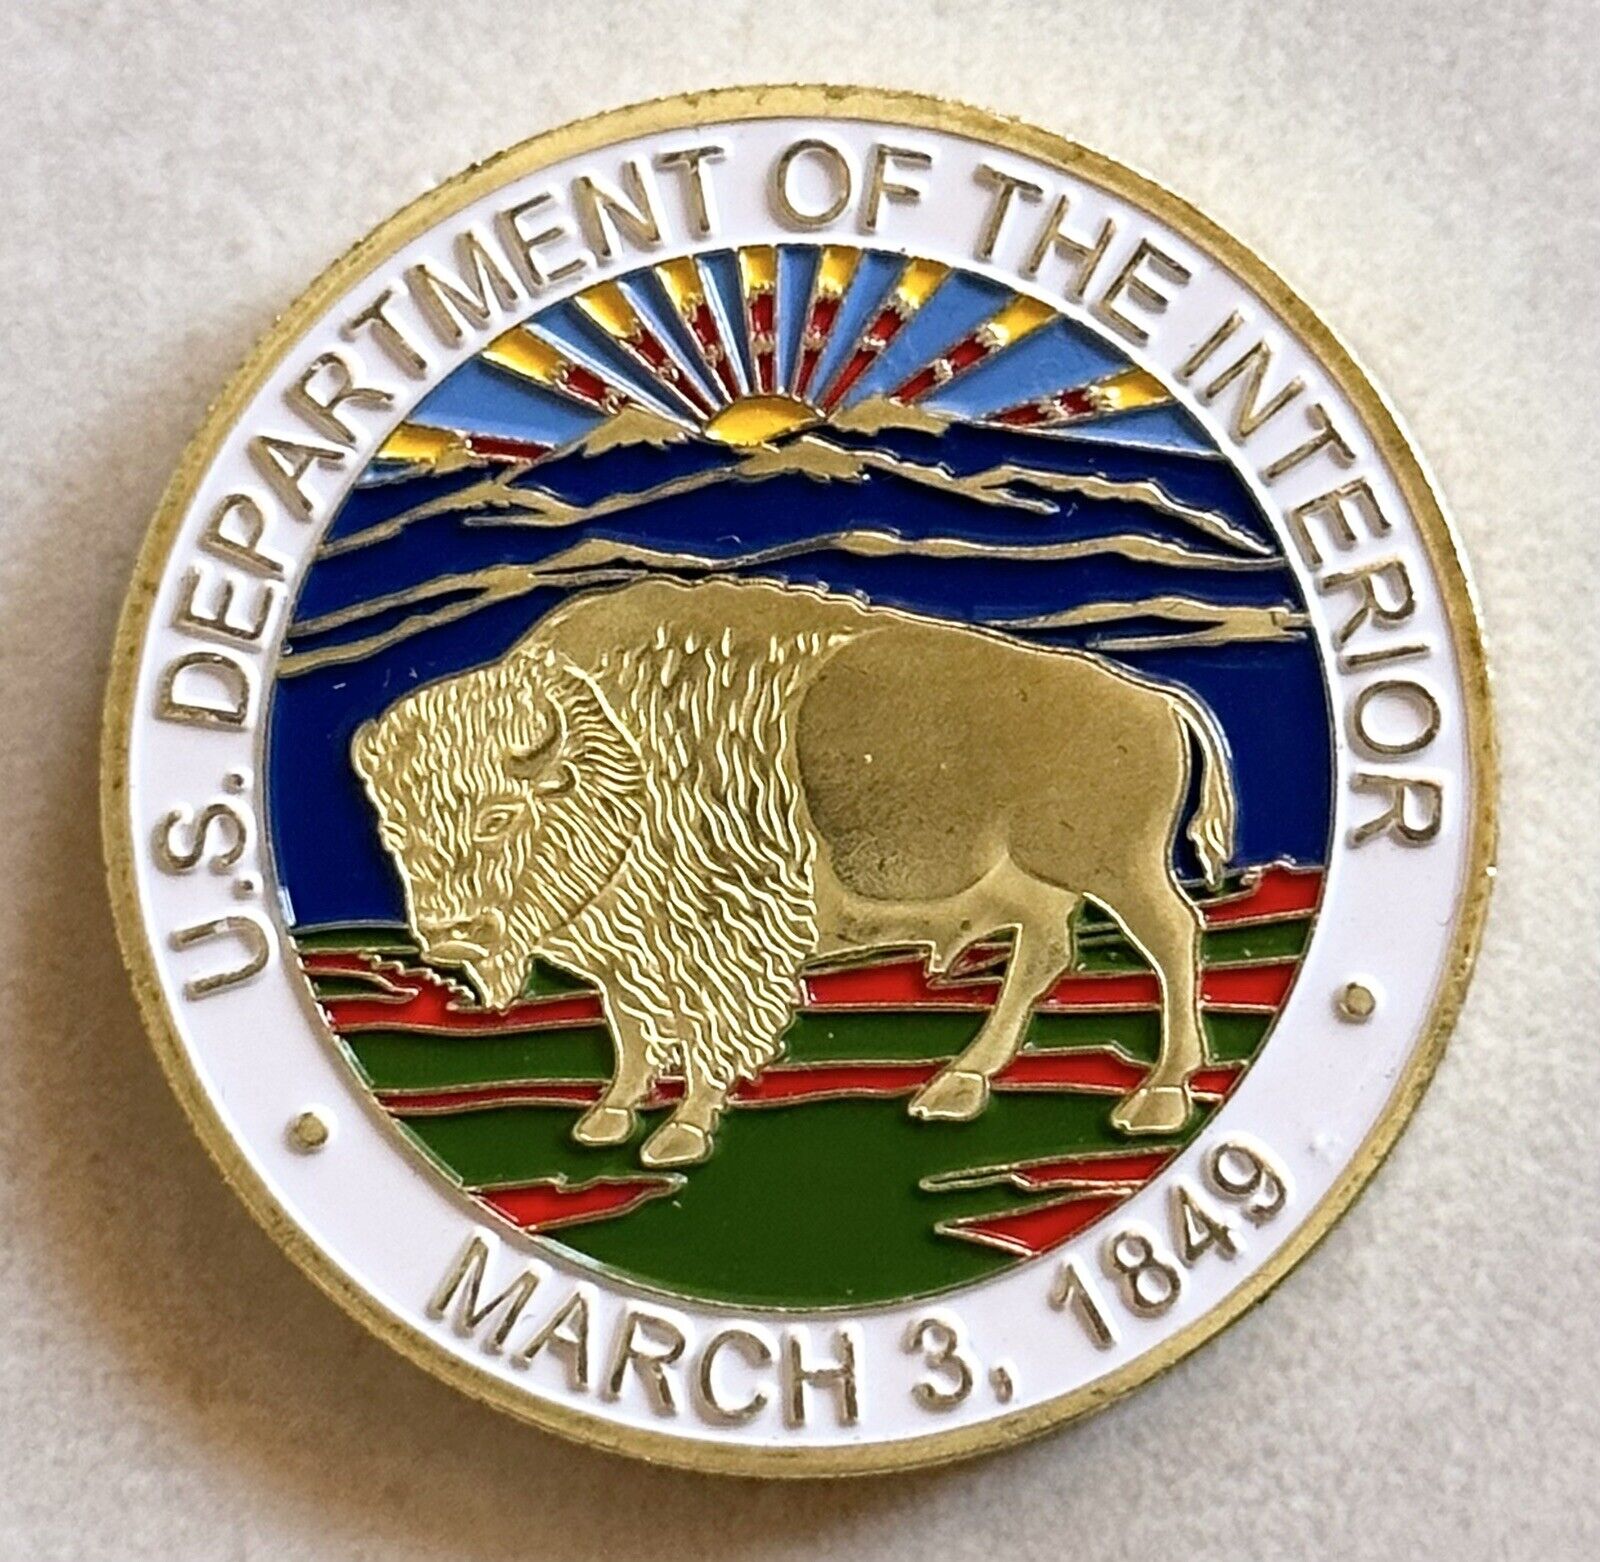 Department of Interior Challenge Coin 